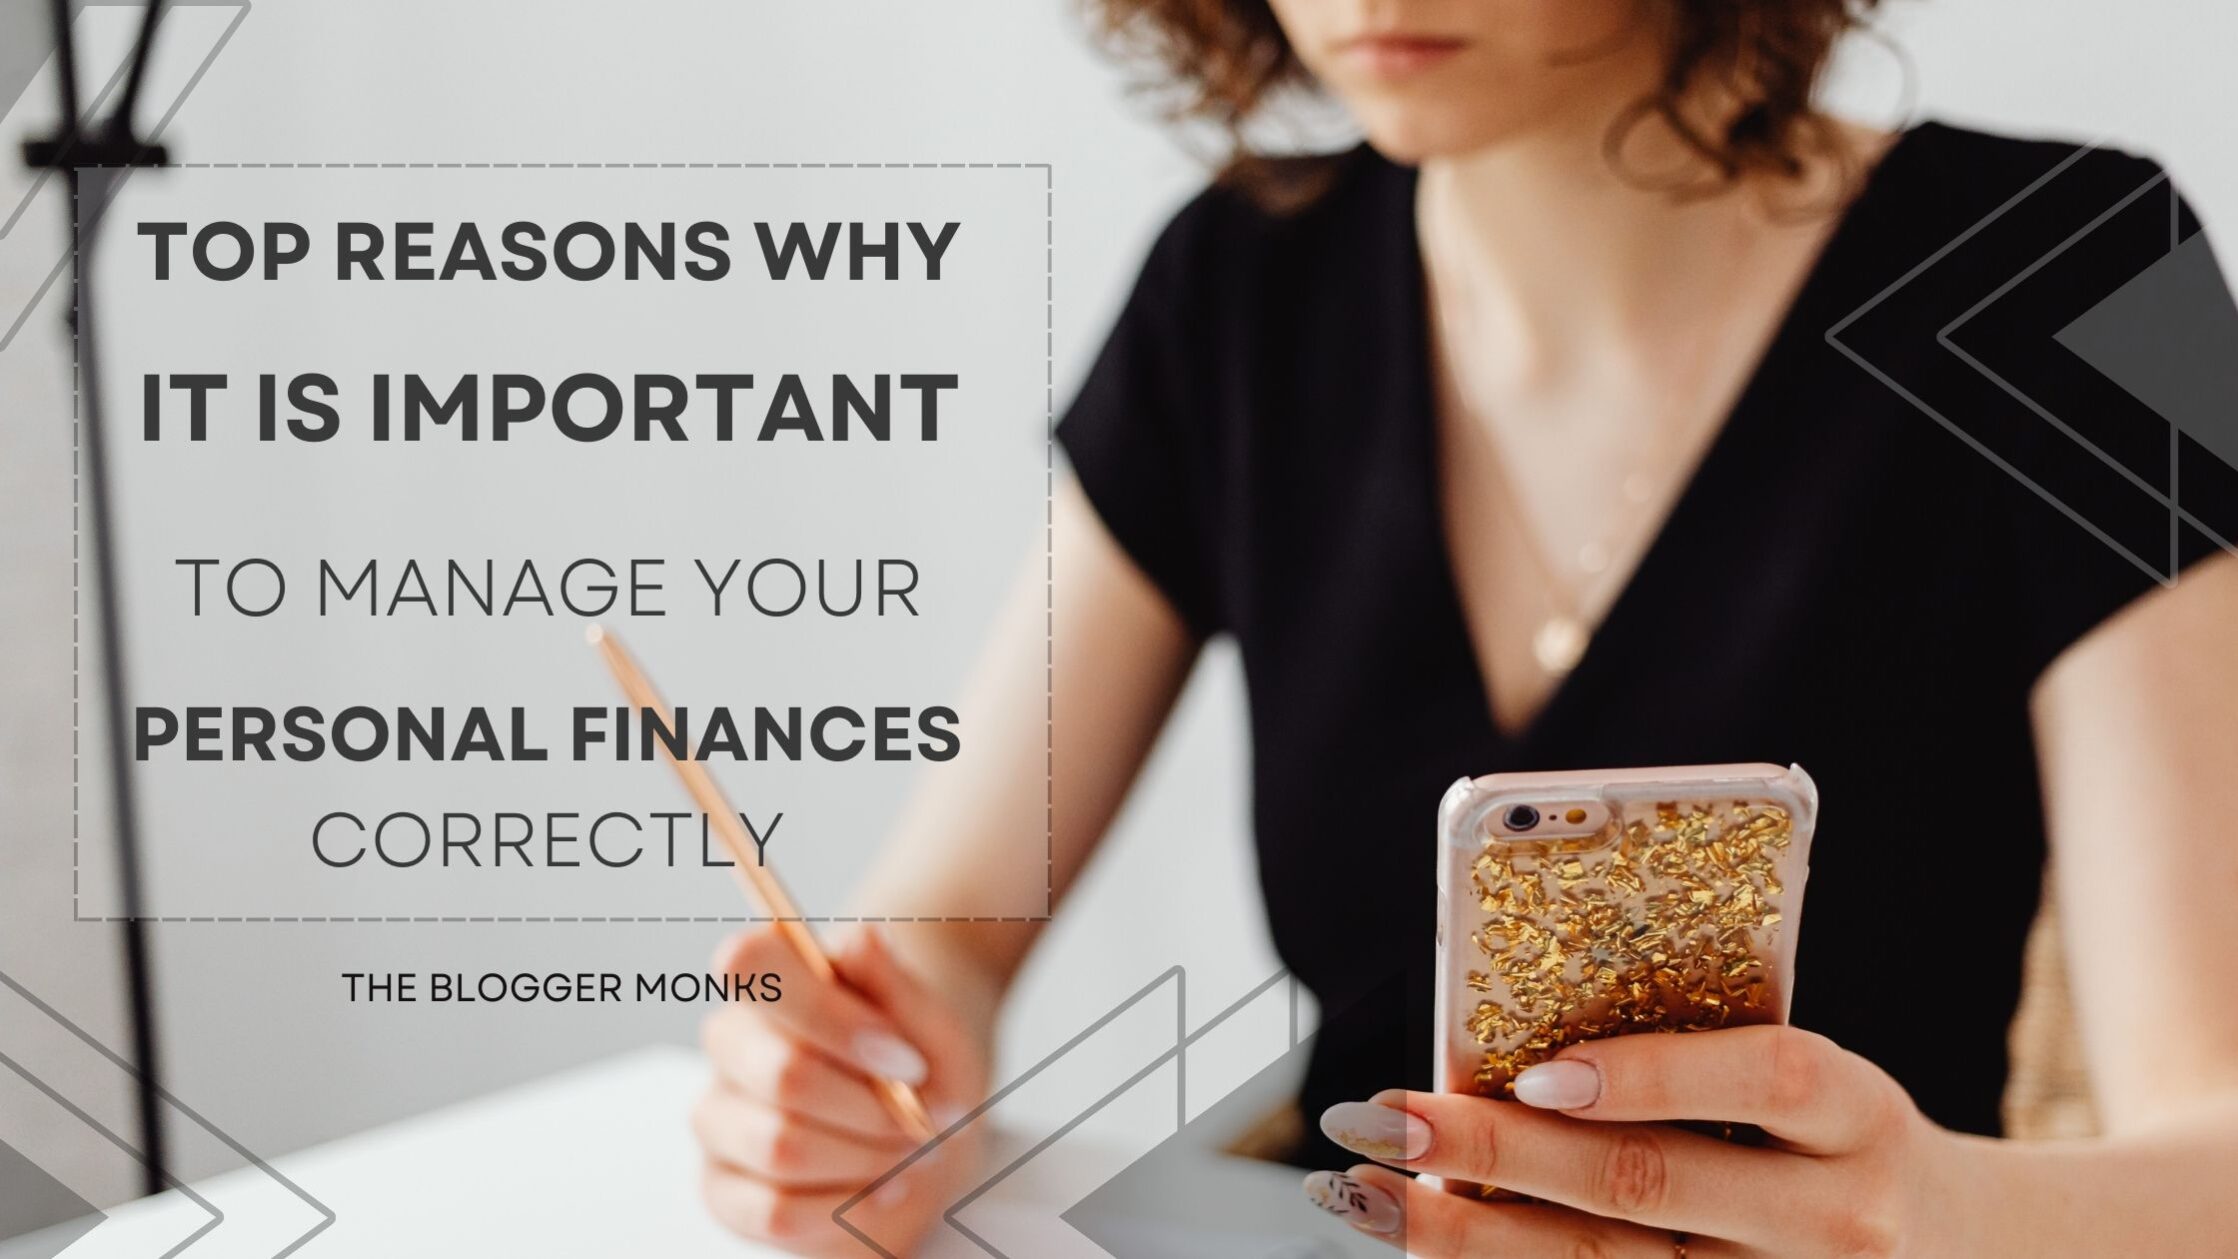 Top reasons why it is important to manage your personal finances correctly